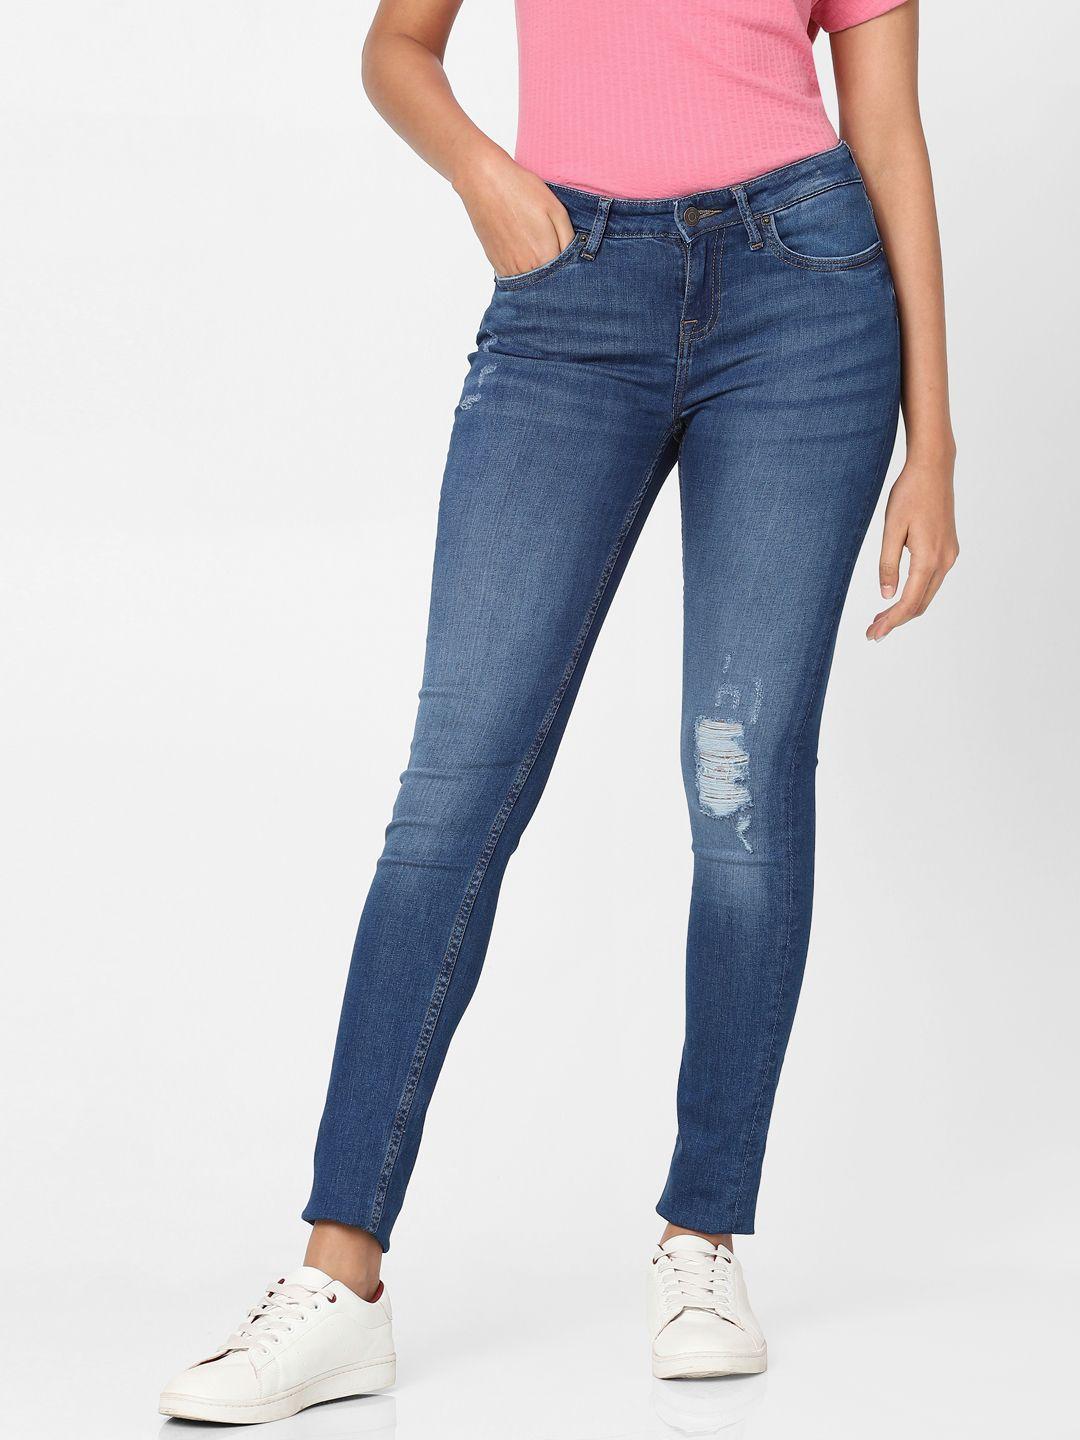 vero-moda-women-blue-skinny-fit-mildly-distressed-mid-rise--stretchable-light-fade-jeans